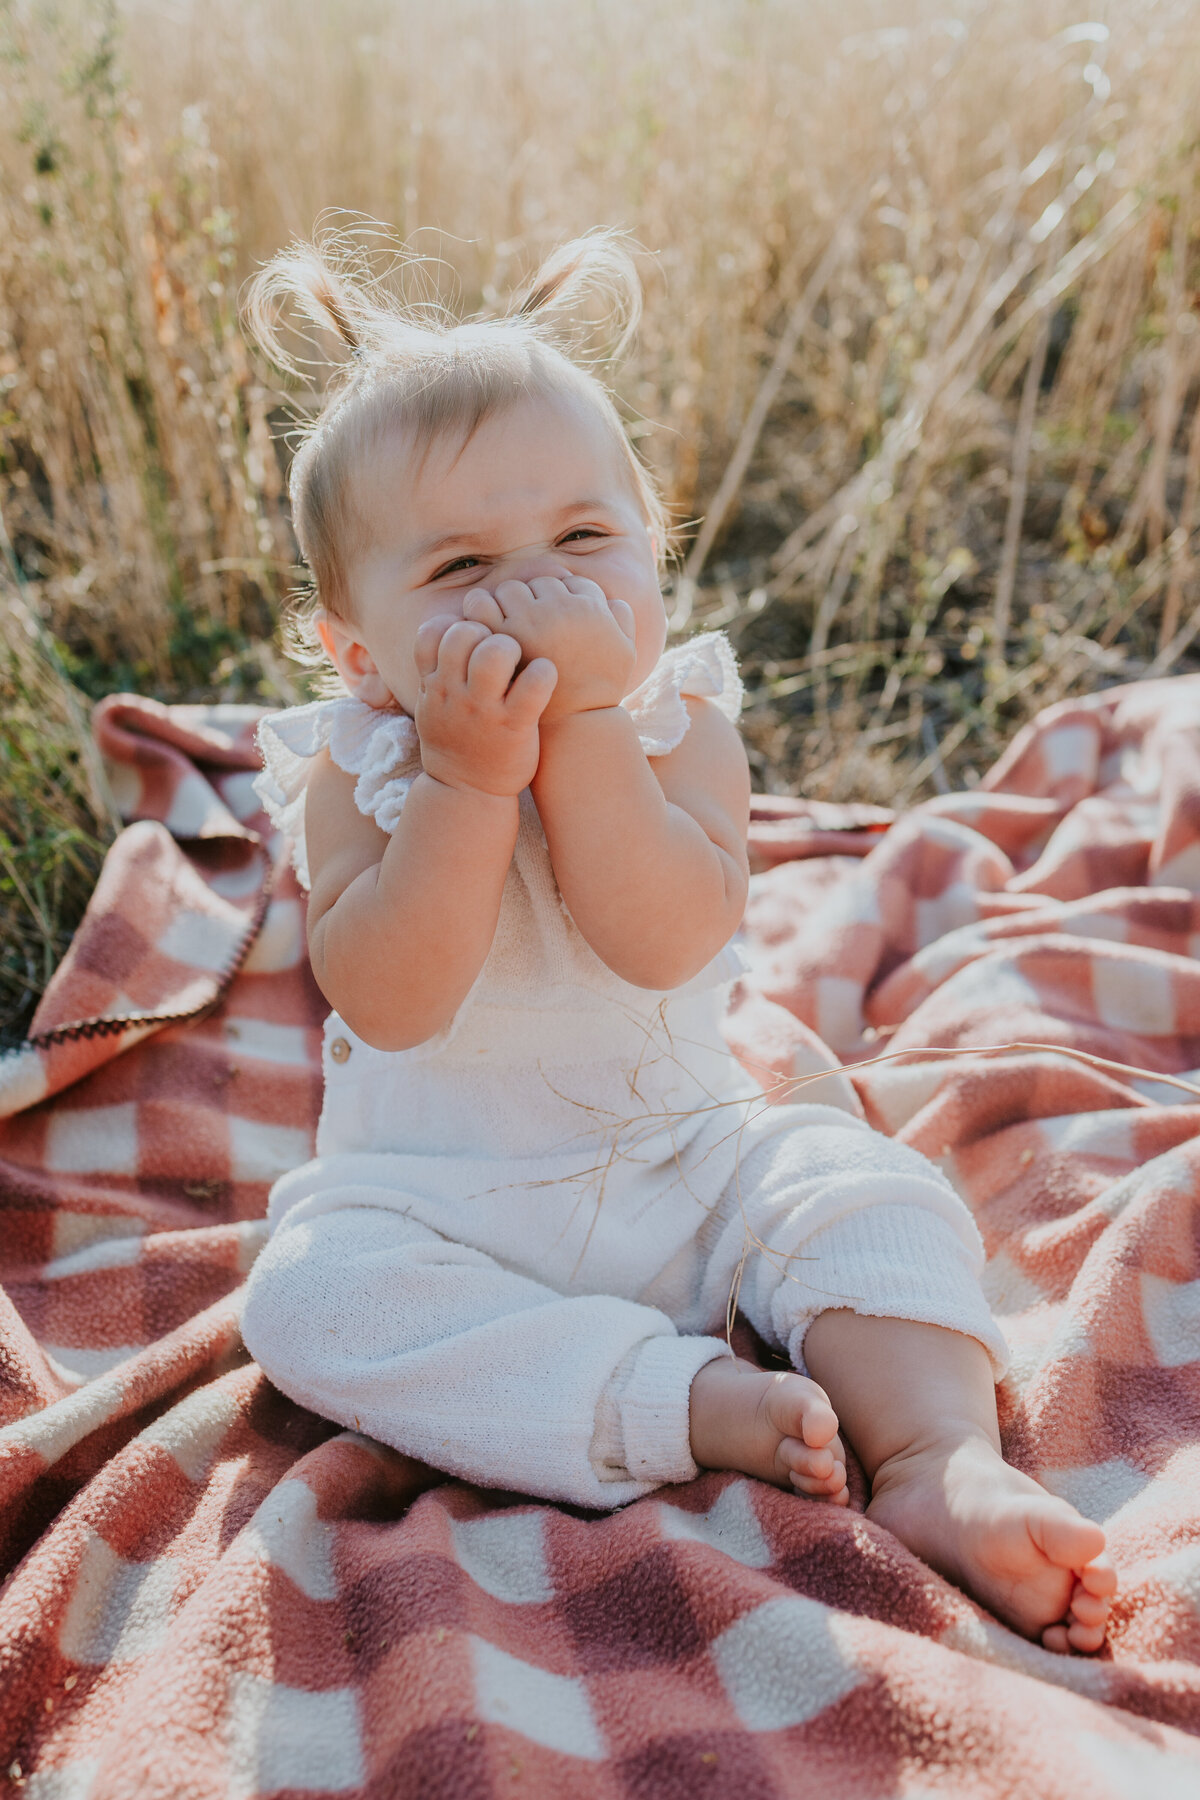 One year old girl covers her mouth and giggles at camera while sitting on red checked blanket in golden field.